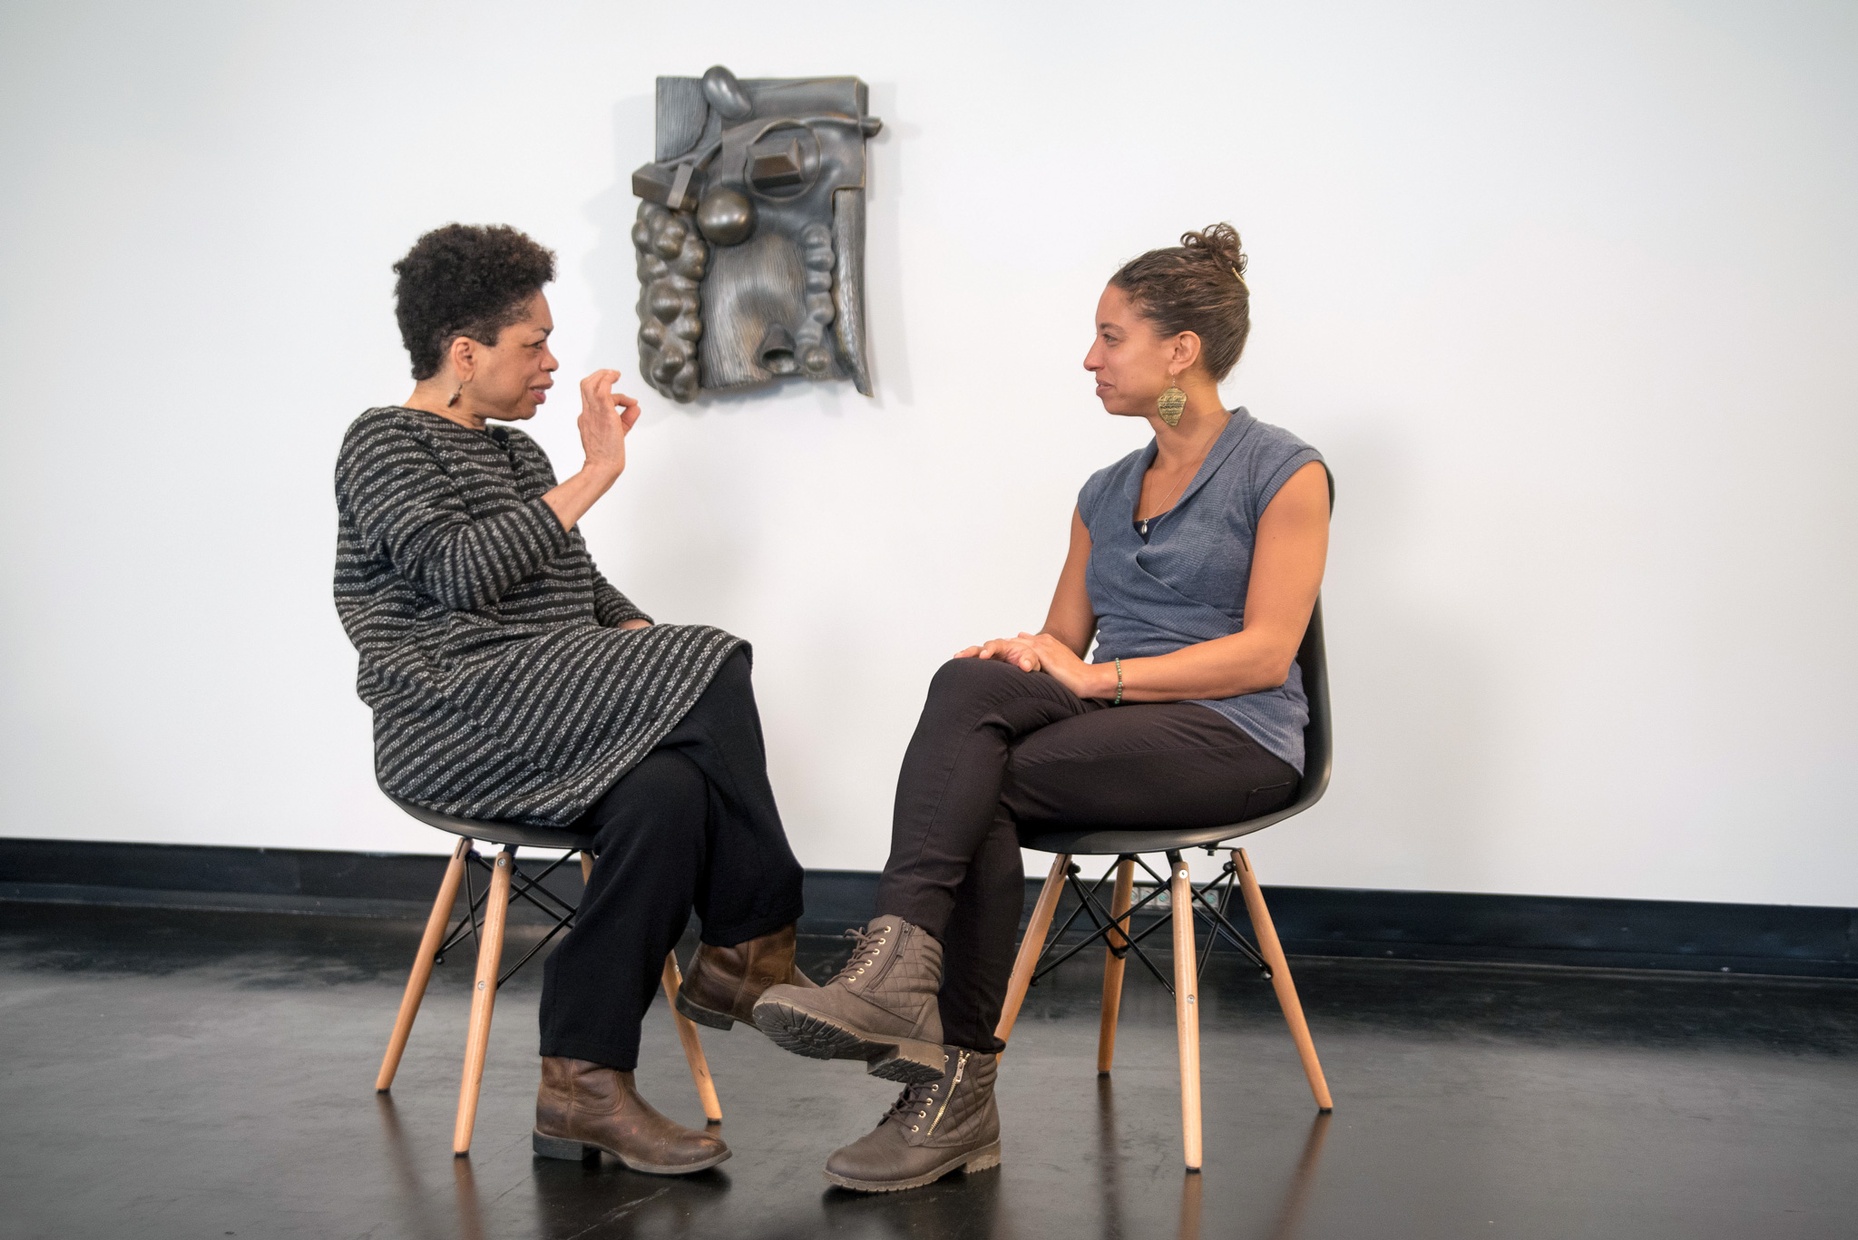 Syd Carpenter sits on a chair in the left side of the photo looking towards Leah Penniman, angled towards Syd in a chair in the right side of the photograph. Syd's sculpture is mounted on the white wall behind them and is visible between the two figures.